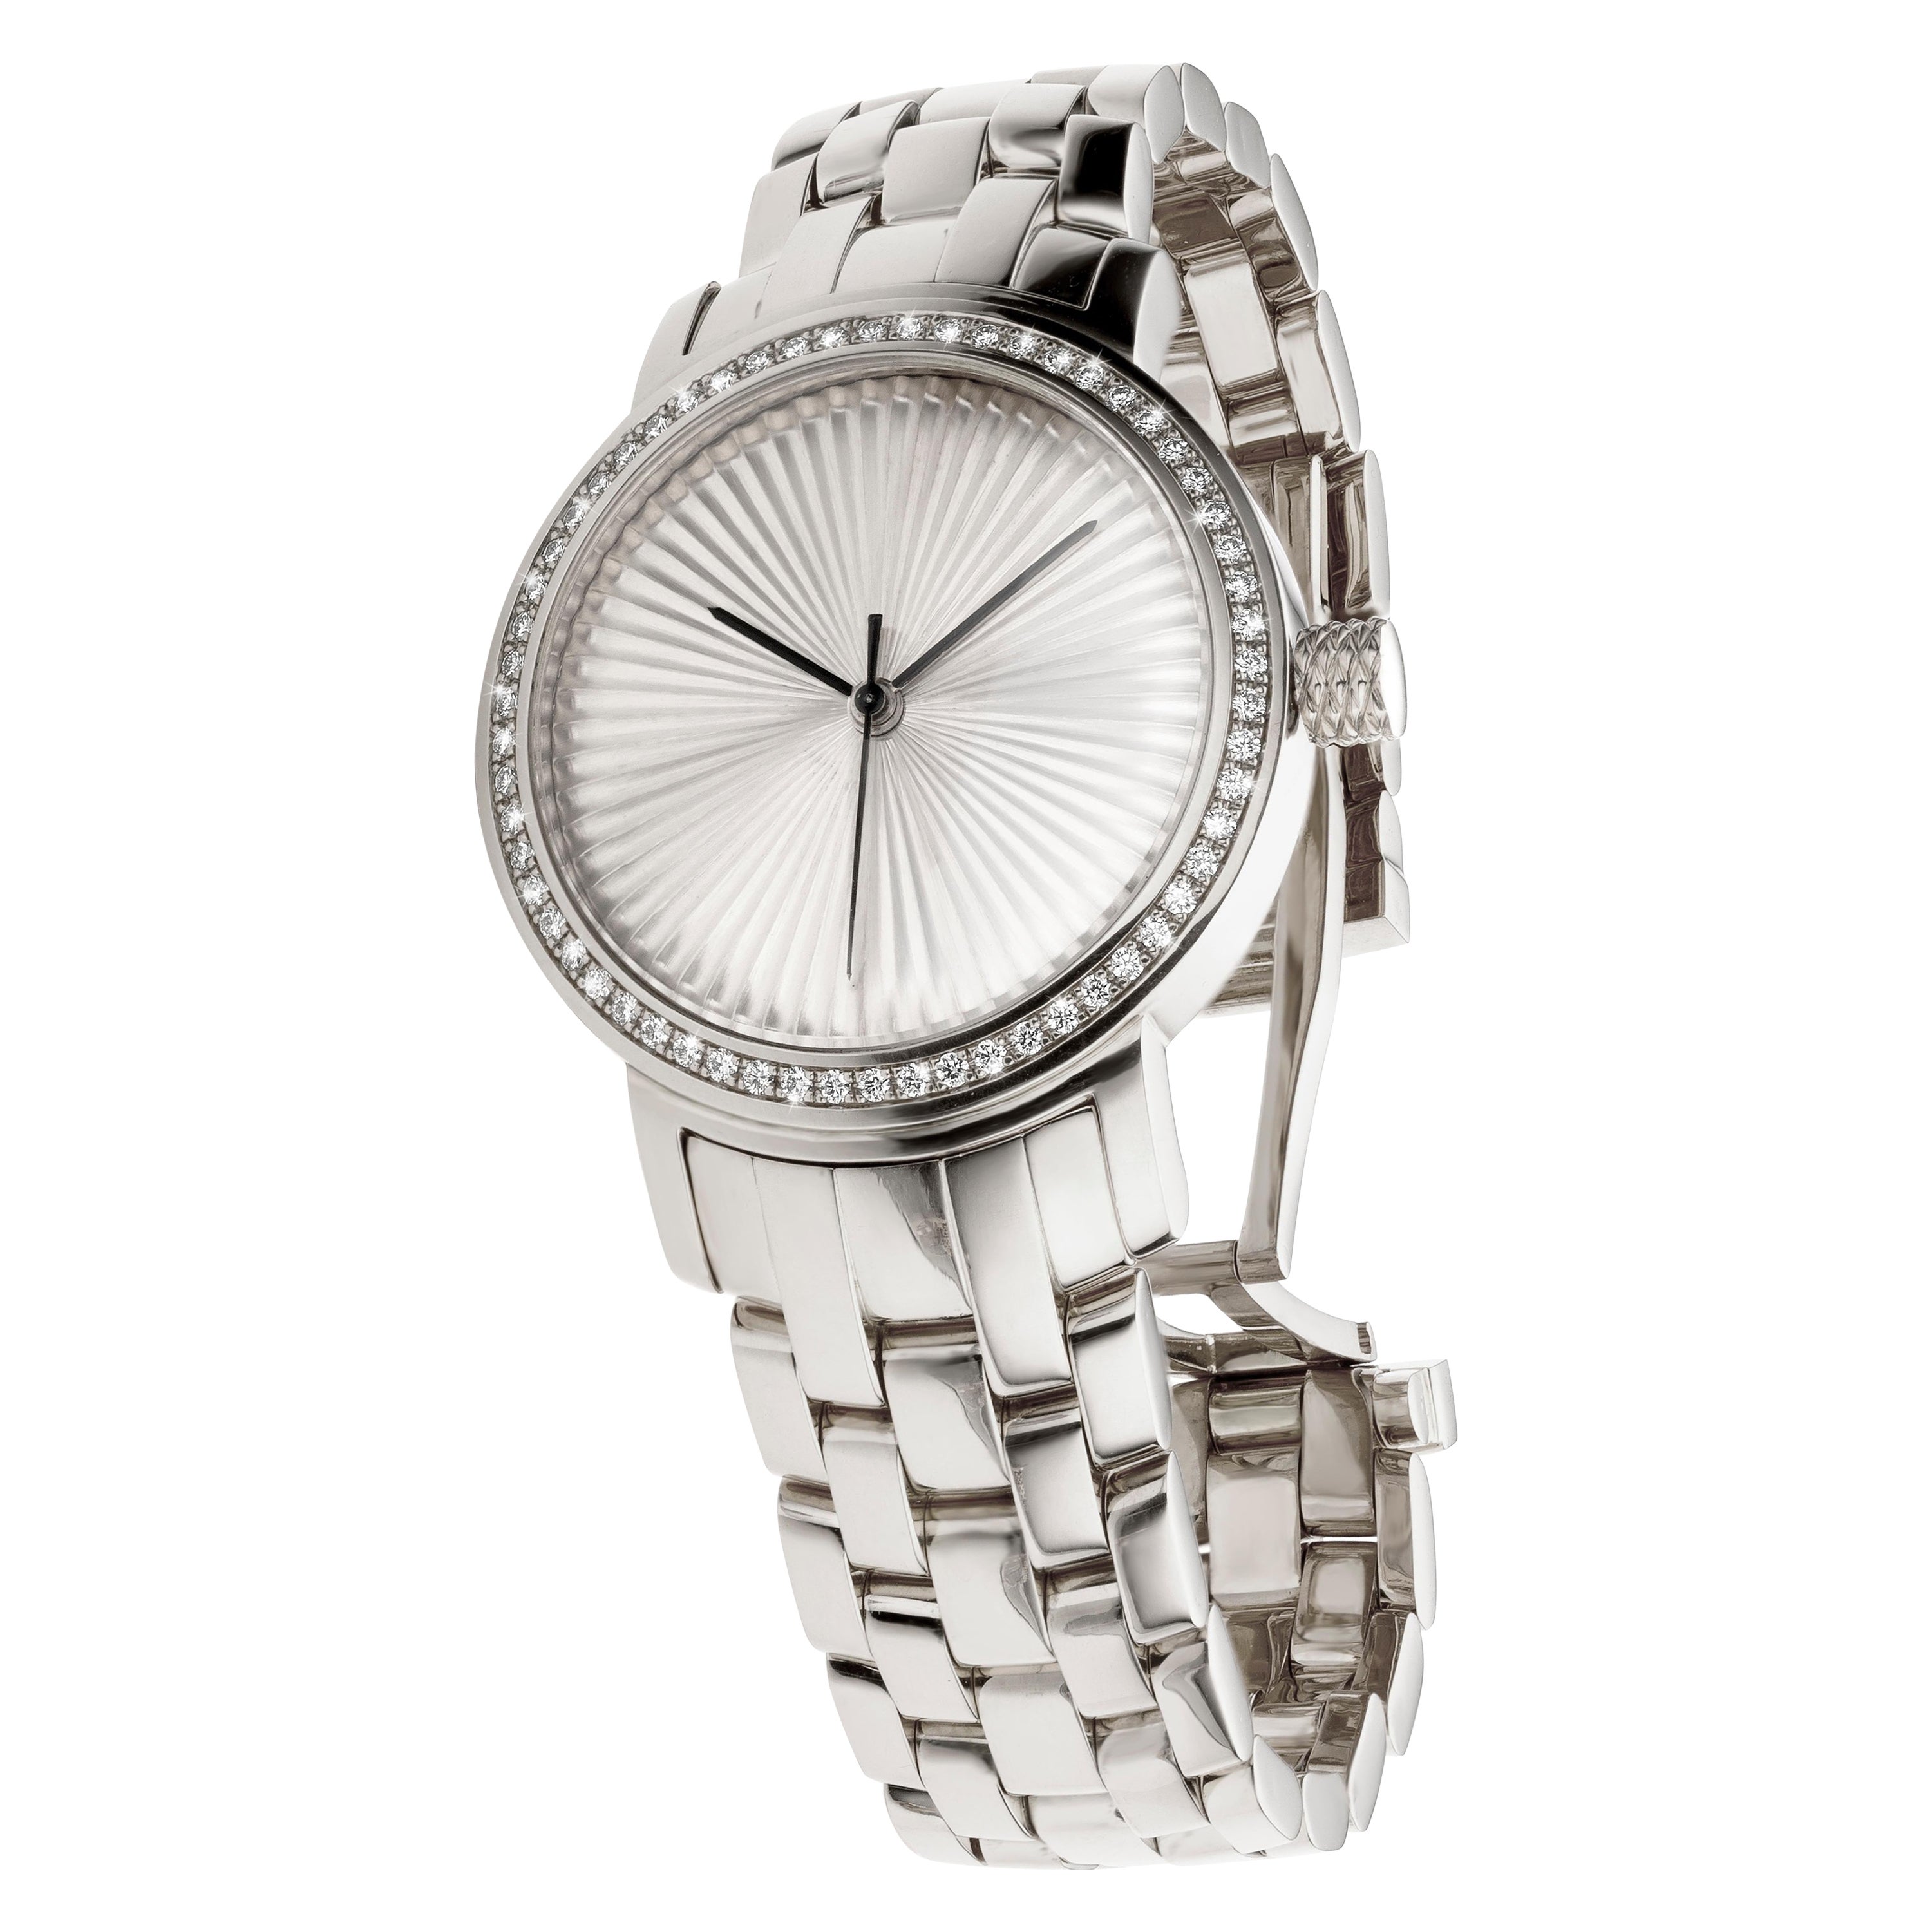 Cober “N°2” ladies limited-edition watch white gold with 60 Diamonds ...